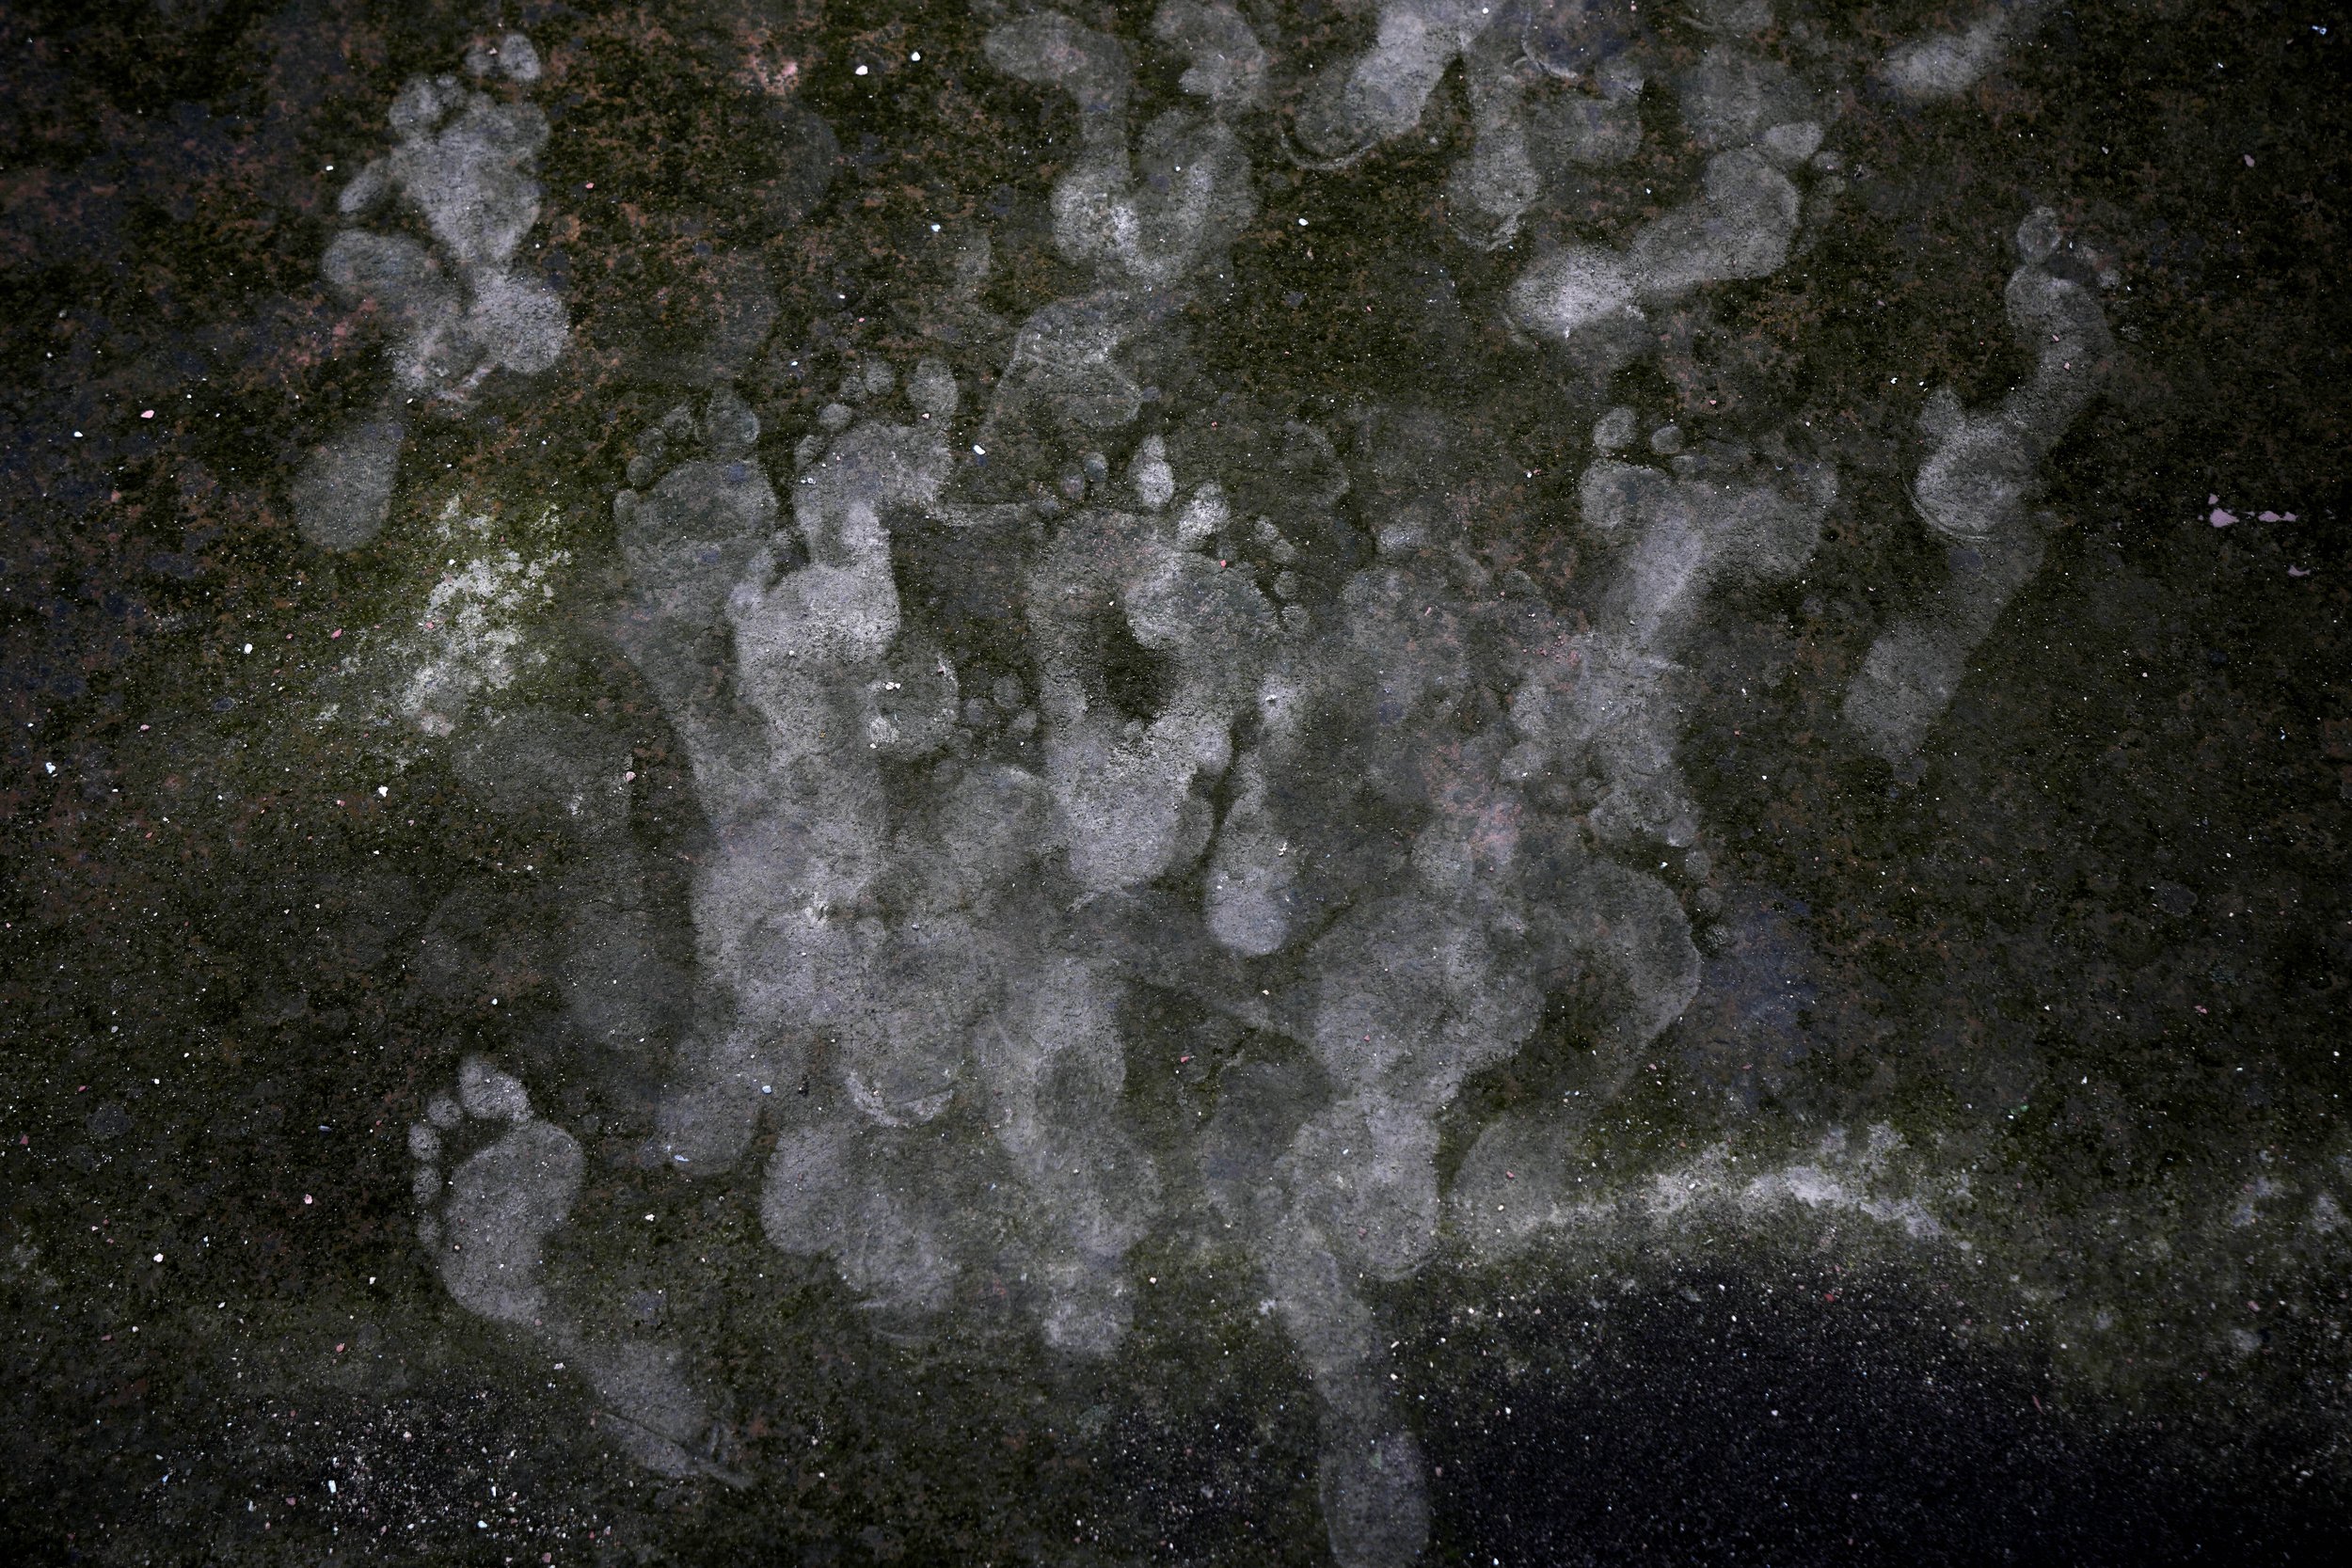  People’s footprints are seen on the moss-covered roof of the Jama Mosque during Eid al-Adha prayers in New Delhi, India, on June 29, 2023. (AP Photo/Manish Swarup) 